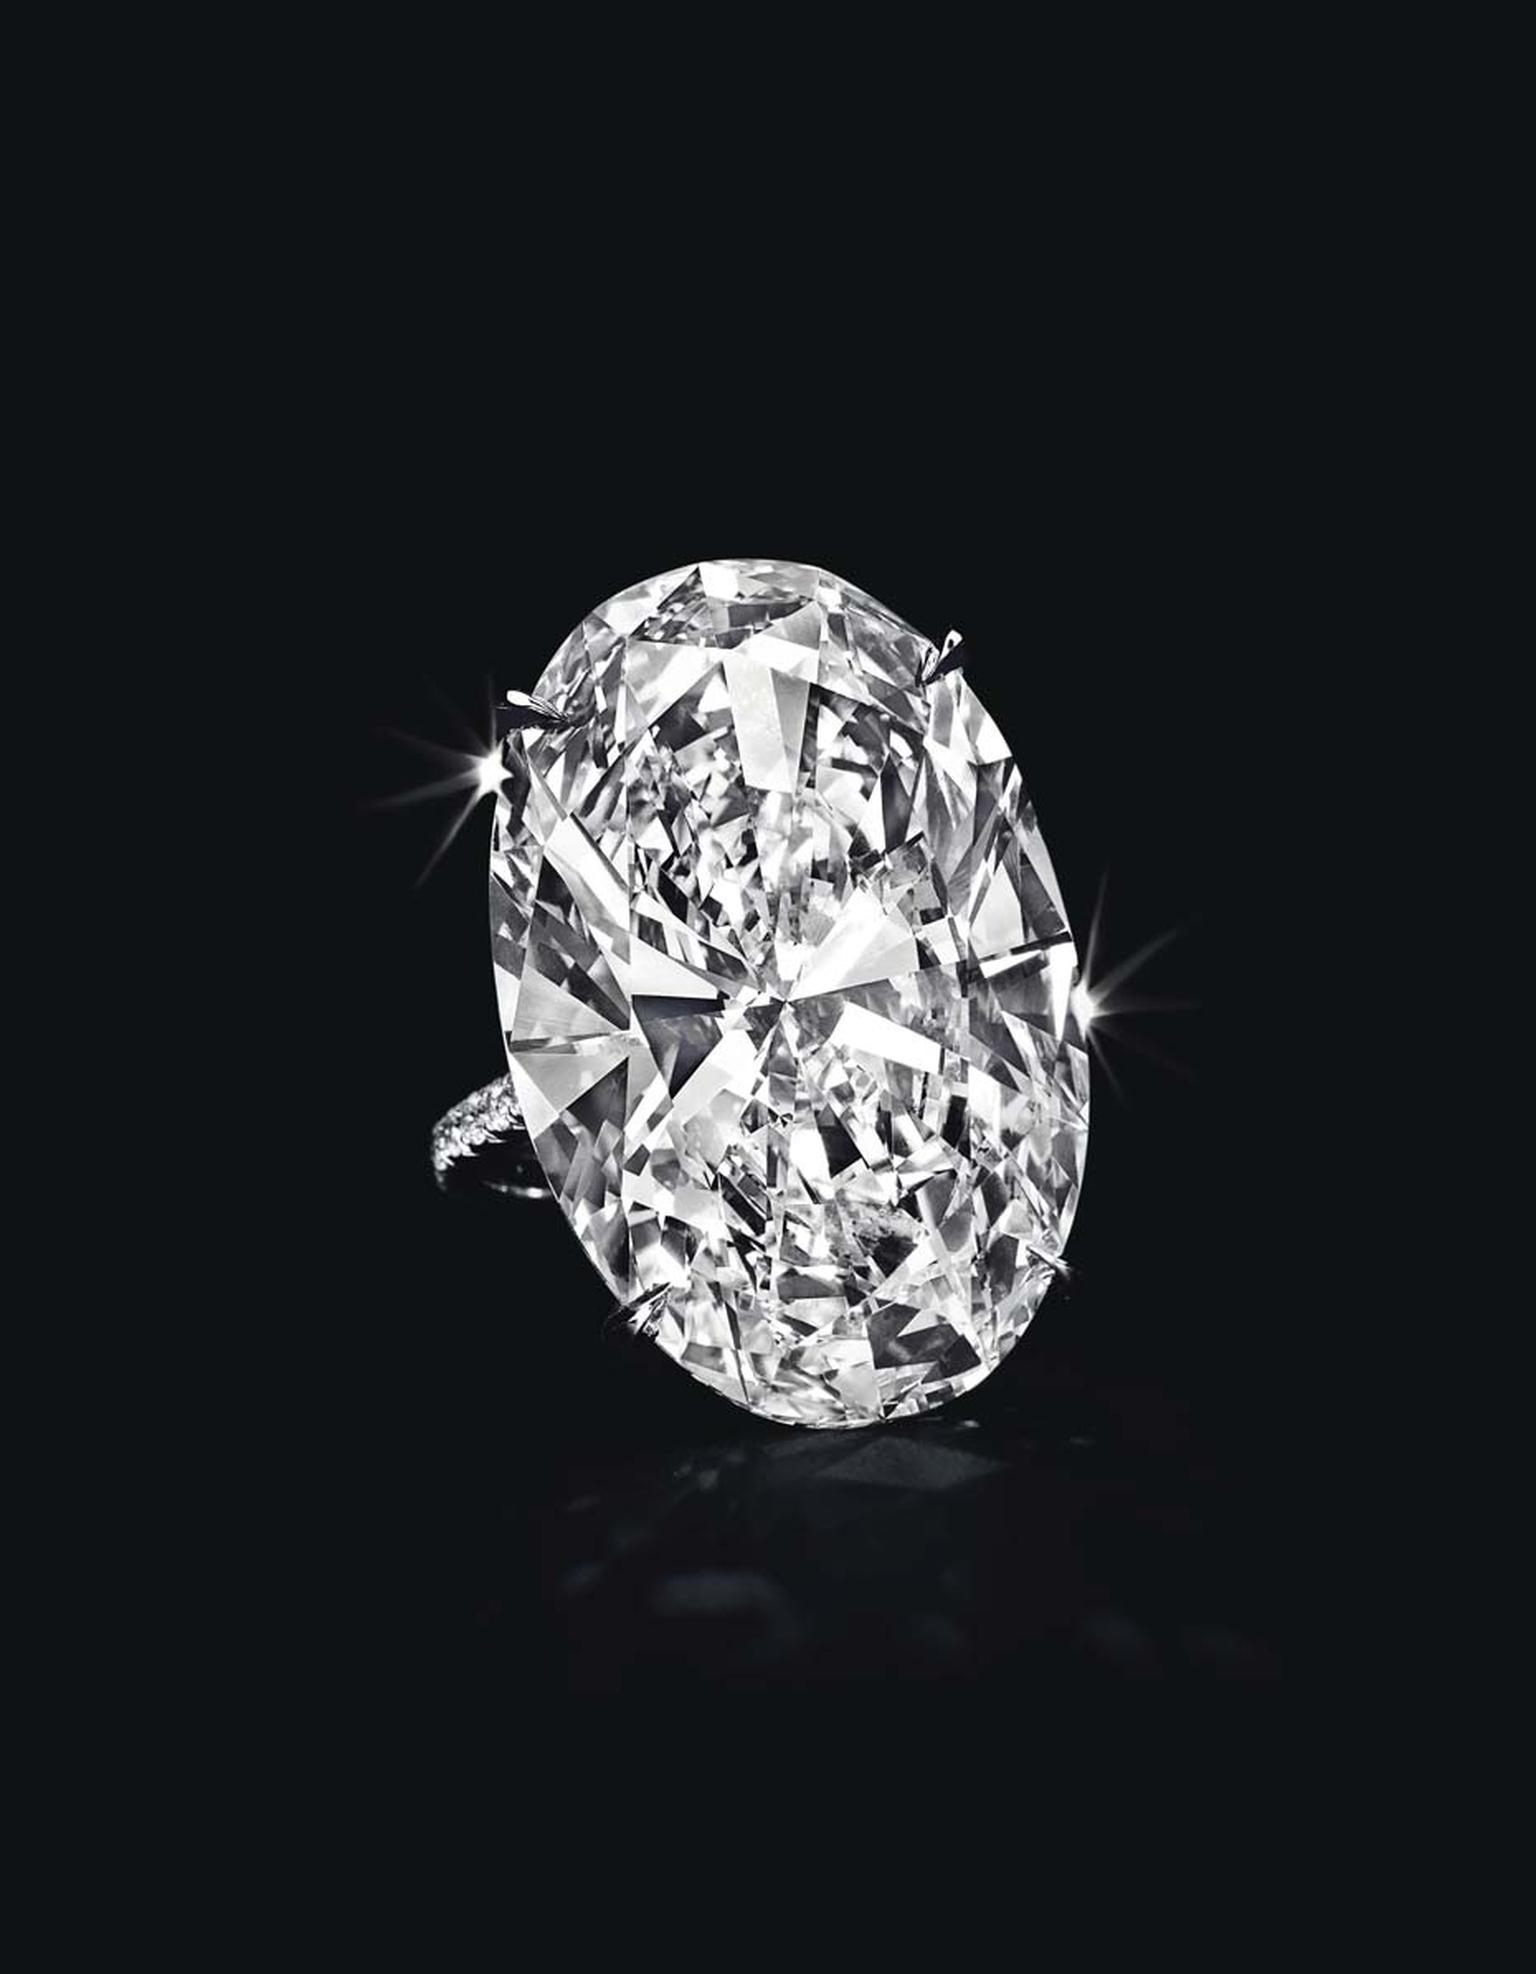 Lot 107, a spectacular diamond and platinum ring, set with an oval-cut diamond weighing approximately 40.43ct, D colour, VVS1 clarity, with excellent polish and excellent symmetry (estimate: $5.8-7.8 million)